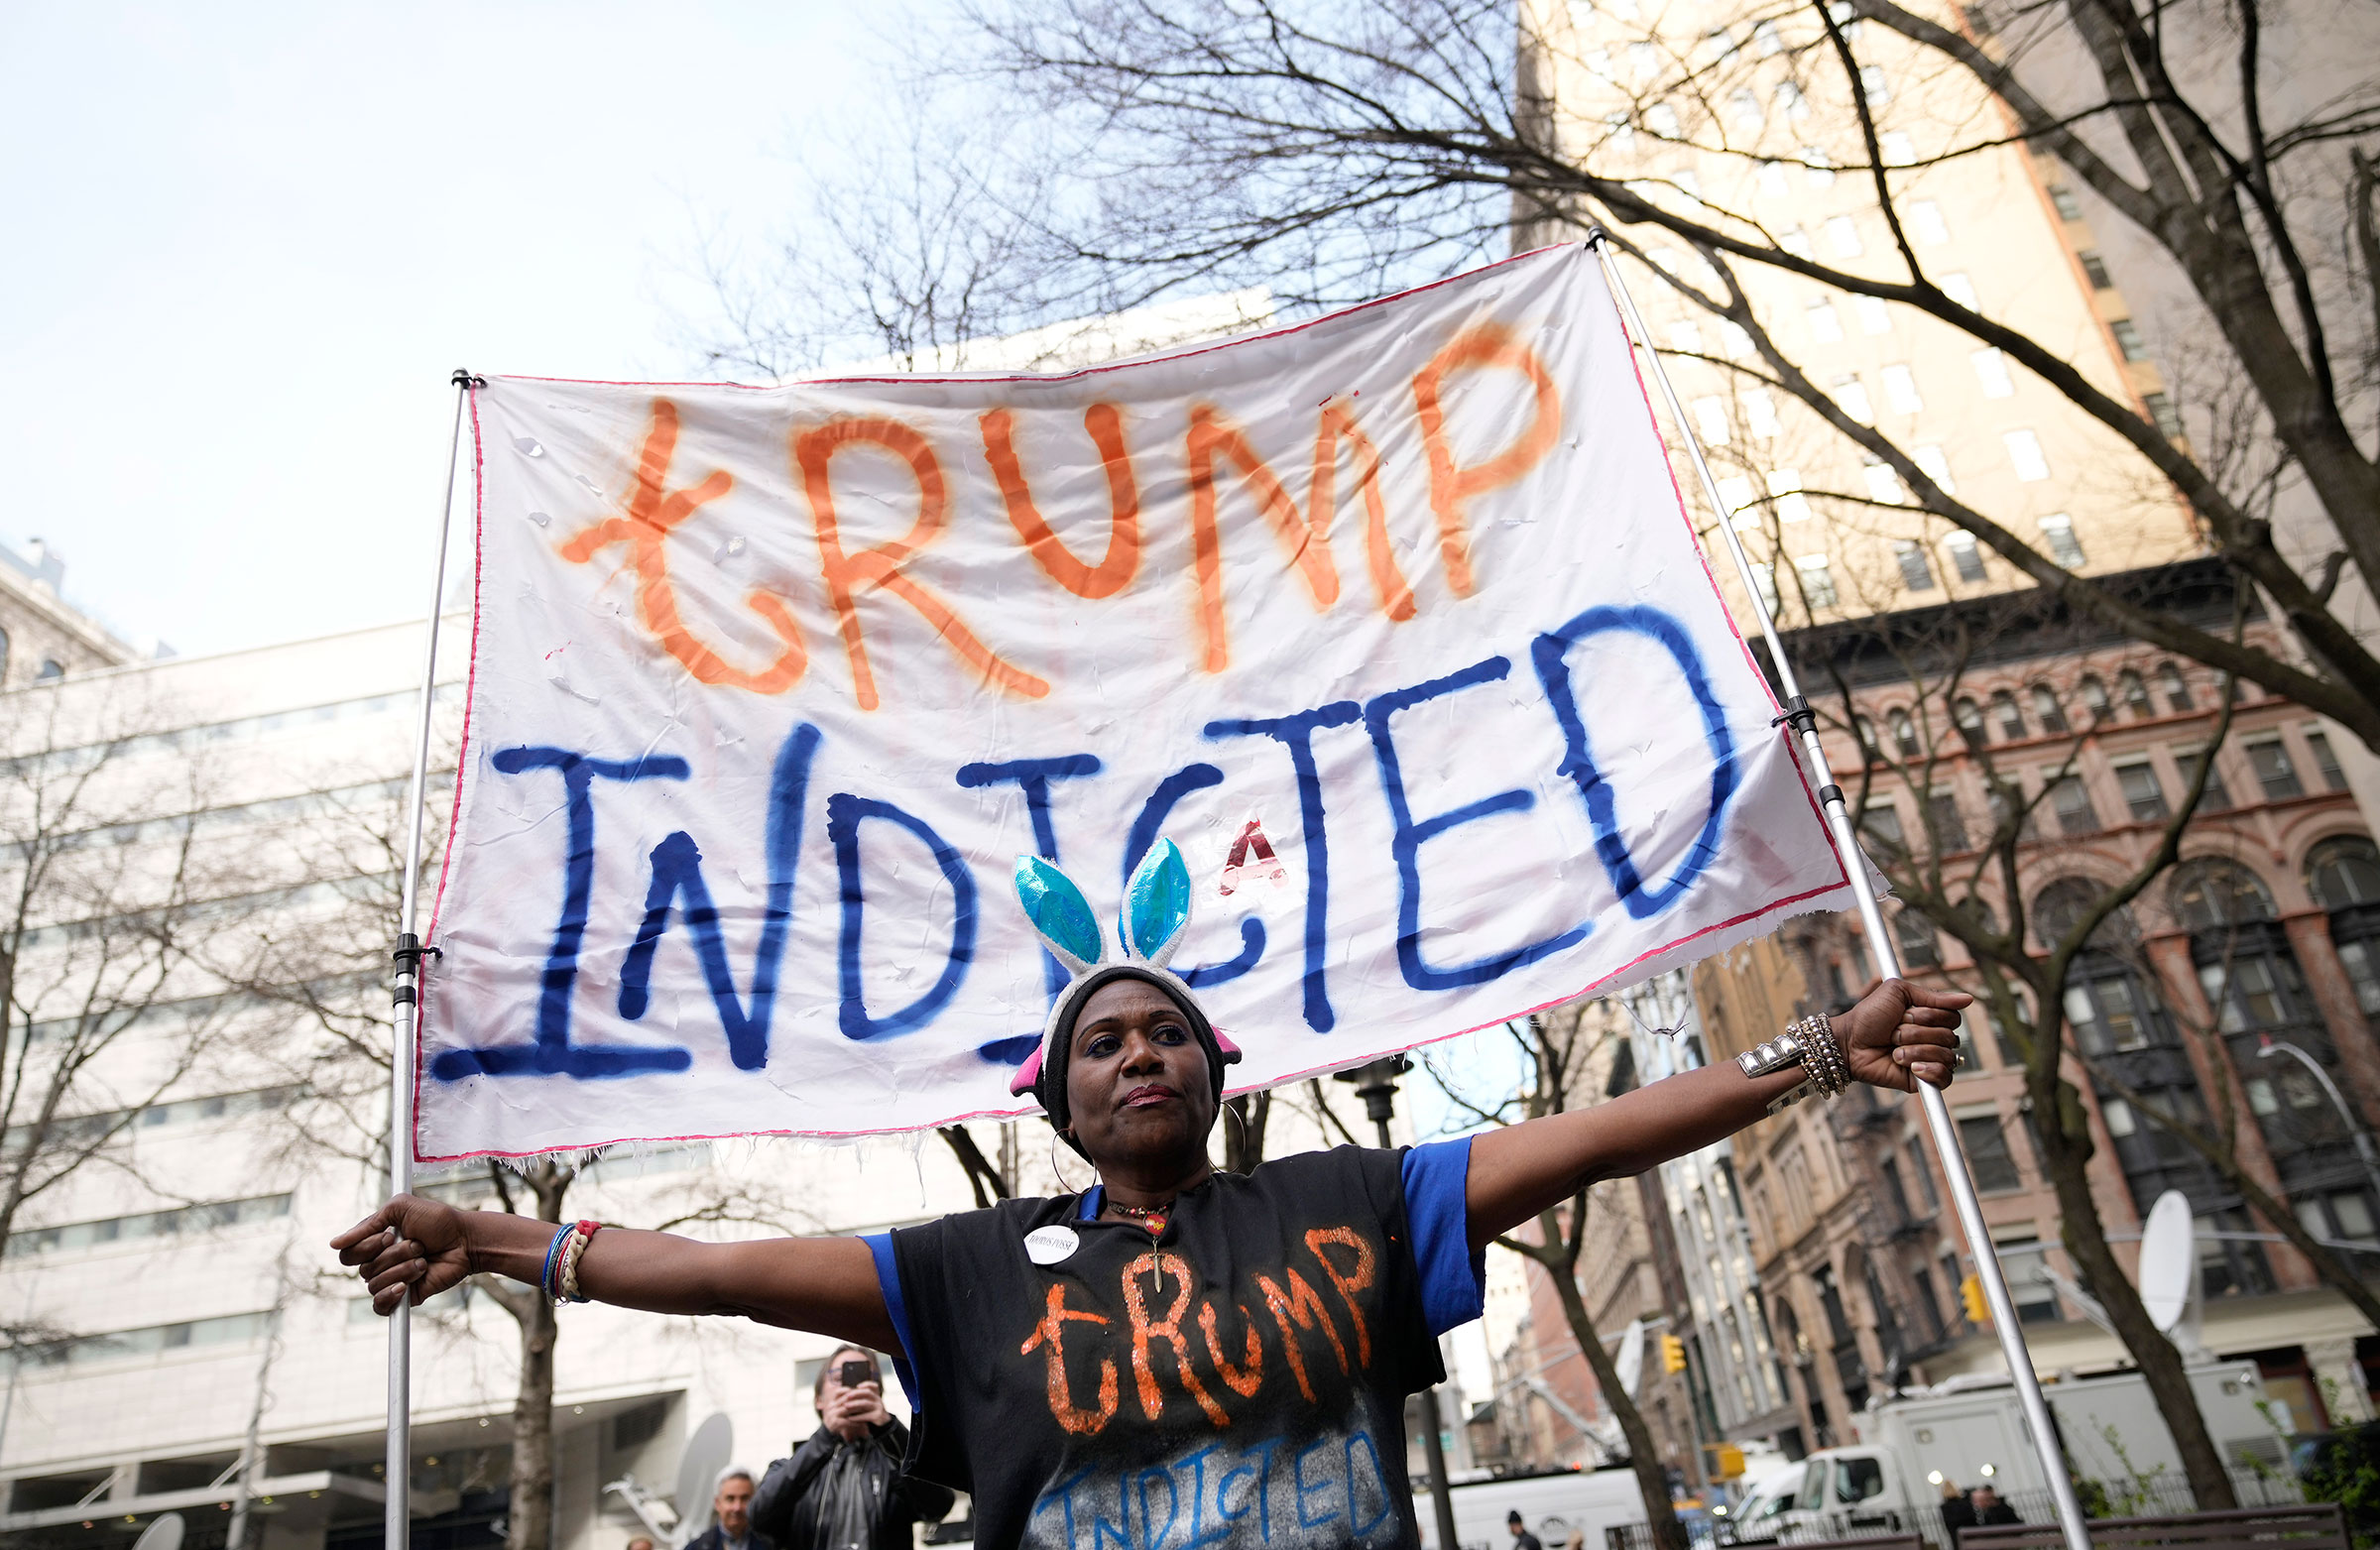 Nadine Seiler holds a sign while gathering outside the courthouse where former President Donald Trump will arrive for his arraignment in New York City on April 4, 2023. (Drew Angerer—Getty Images)